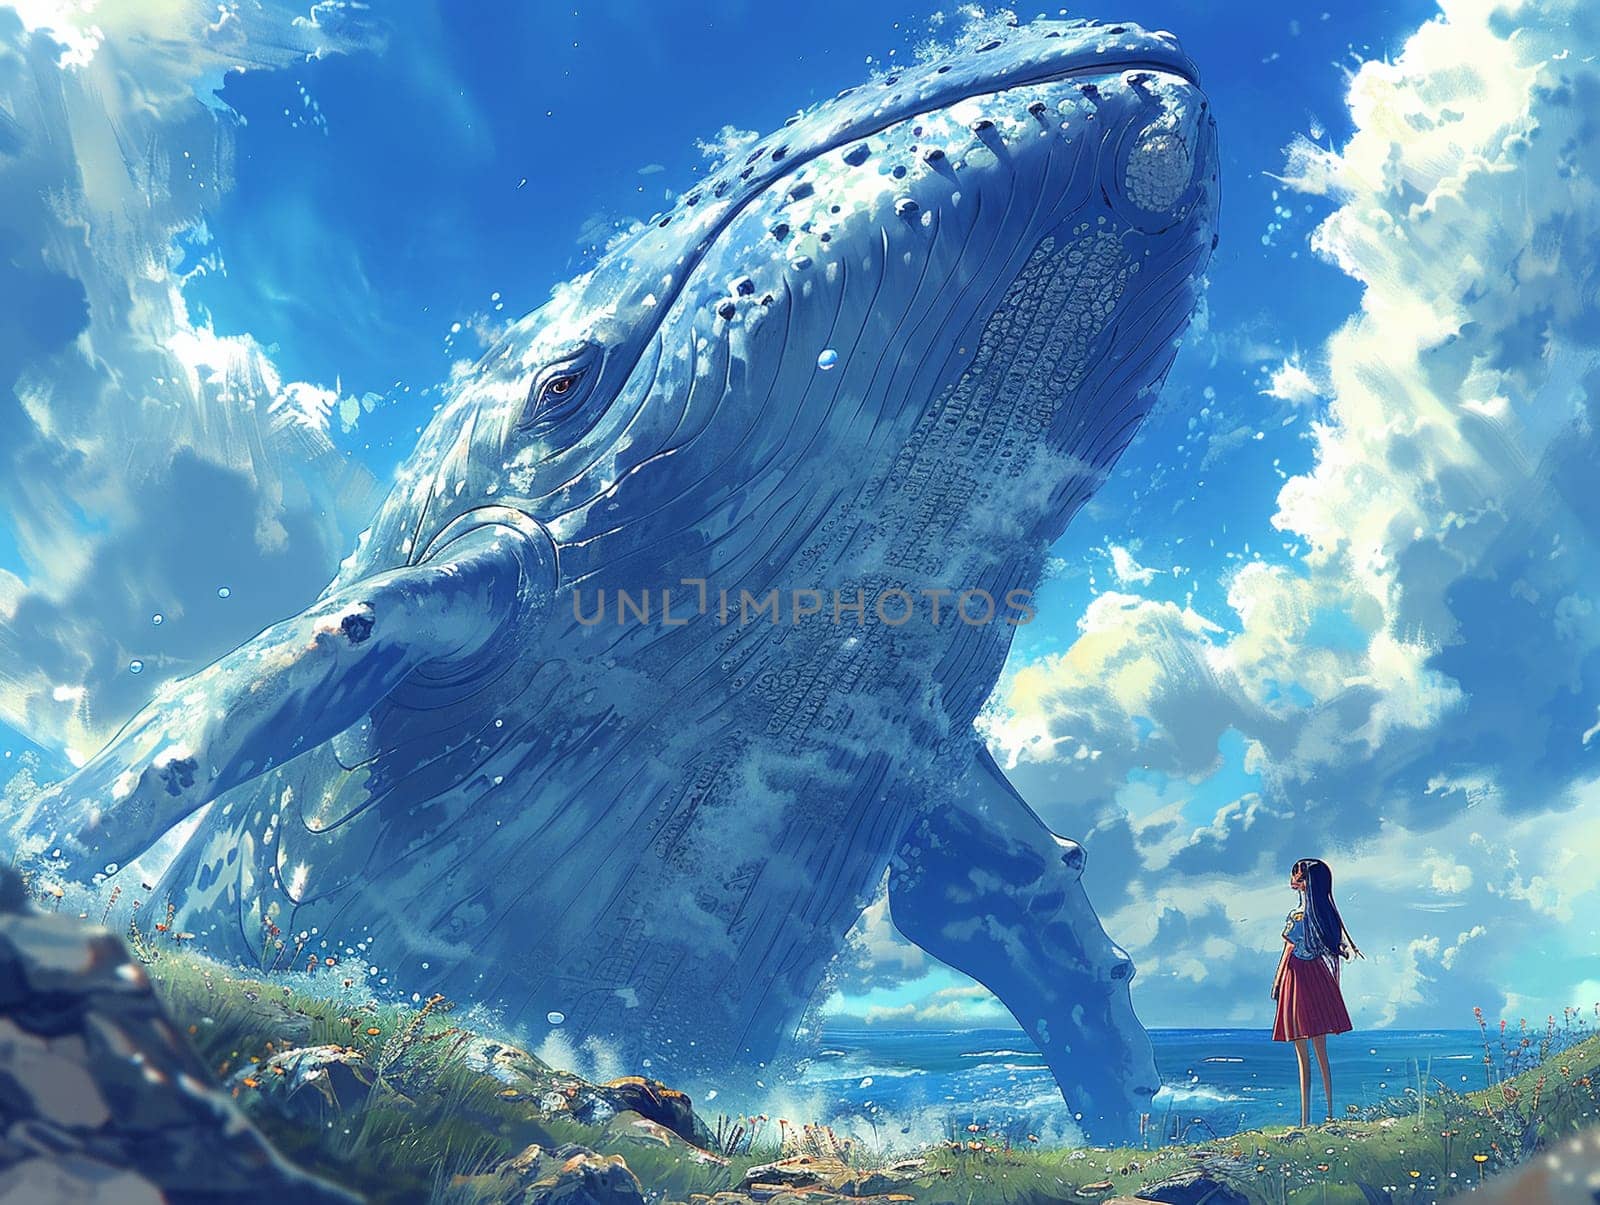 Whale watching excursion with anime characters, illustration showing awe and the majesty of marine life.